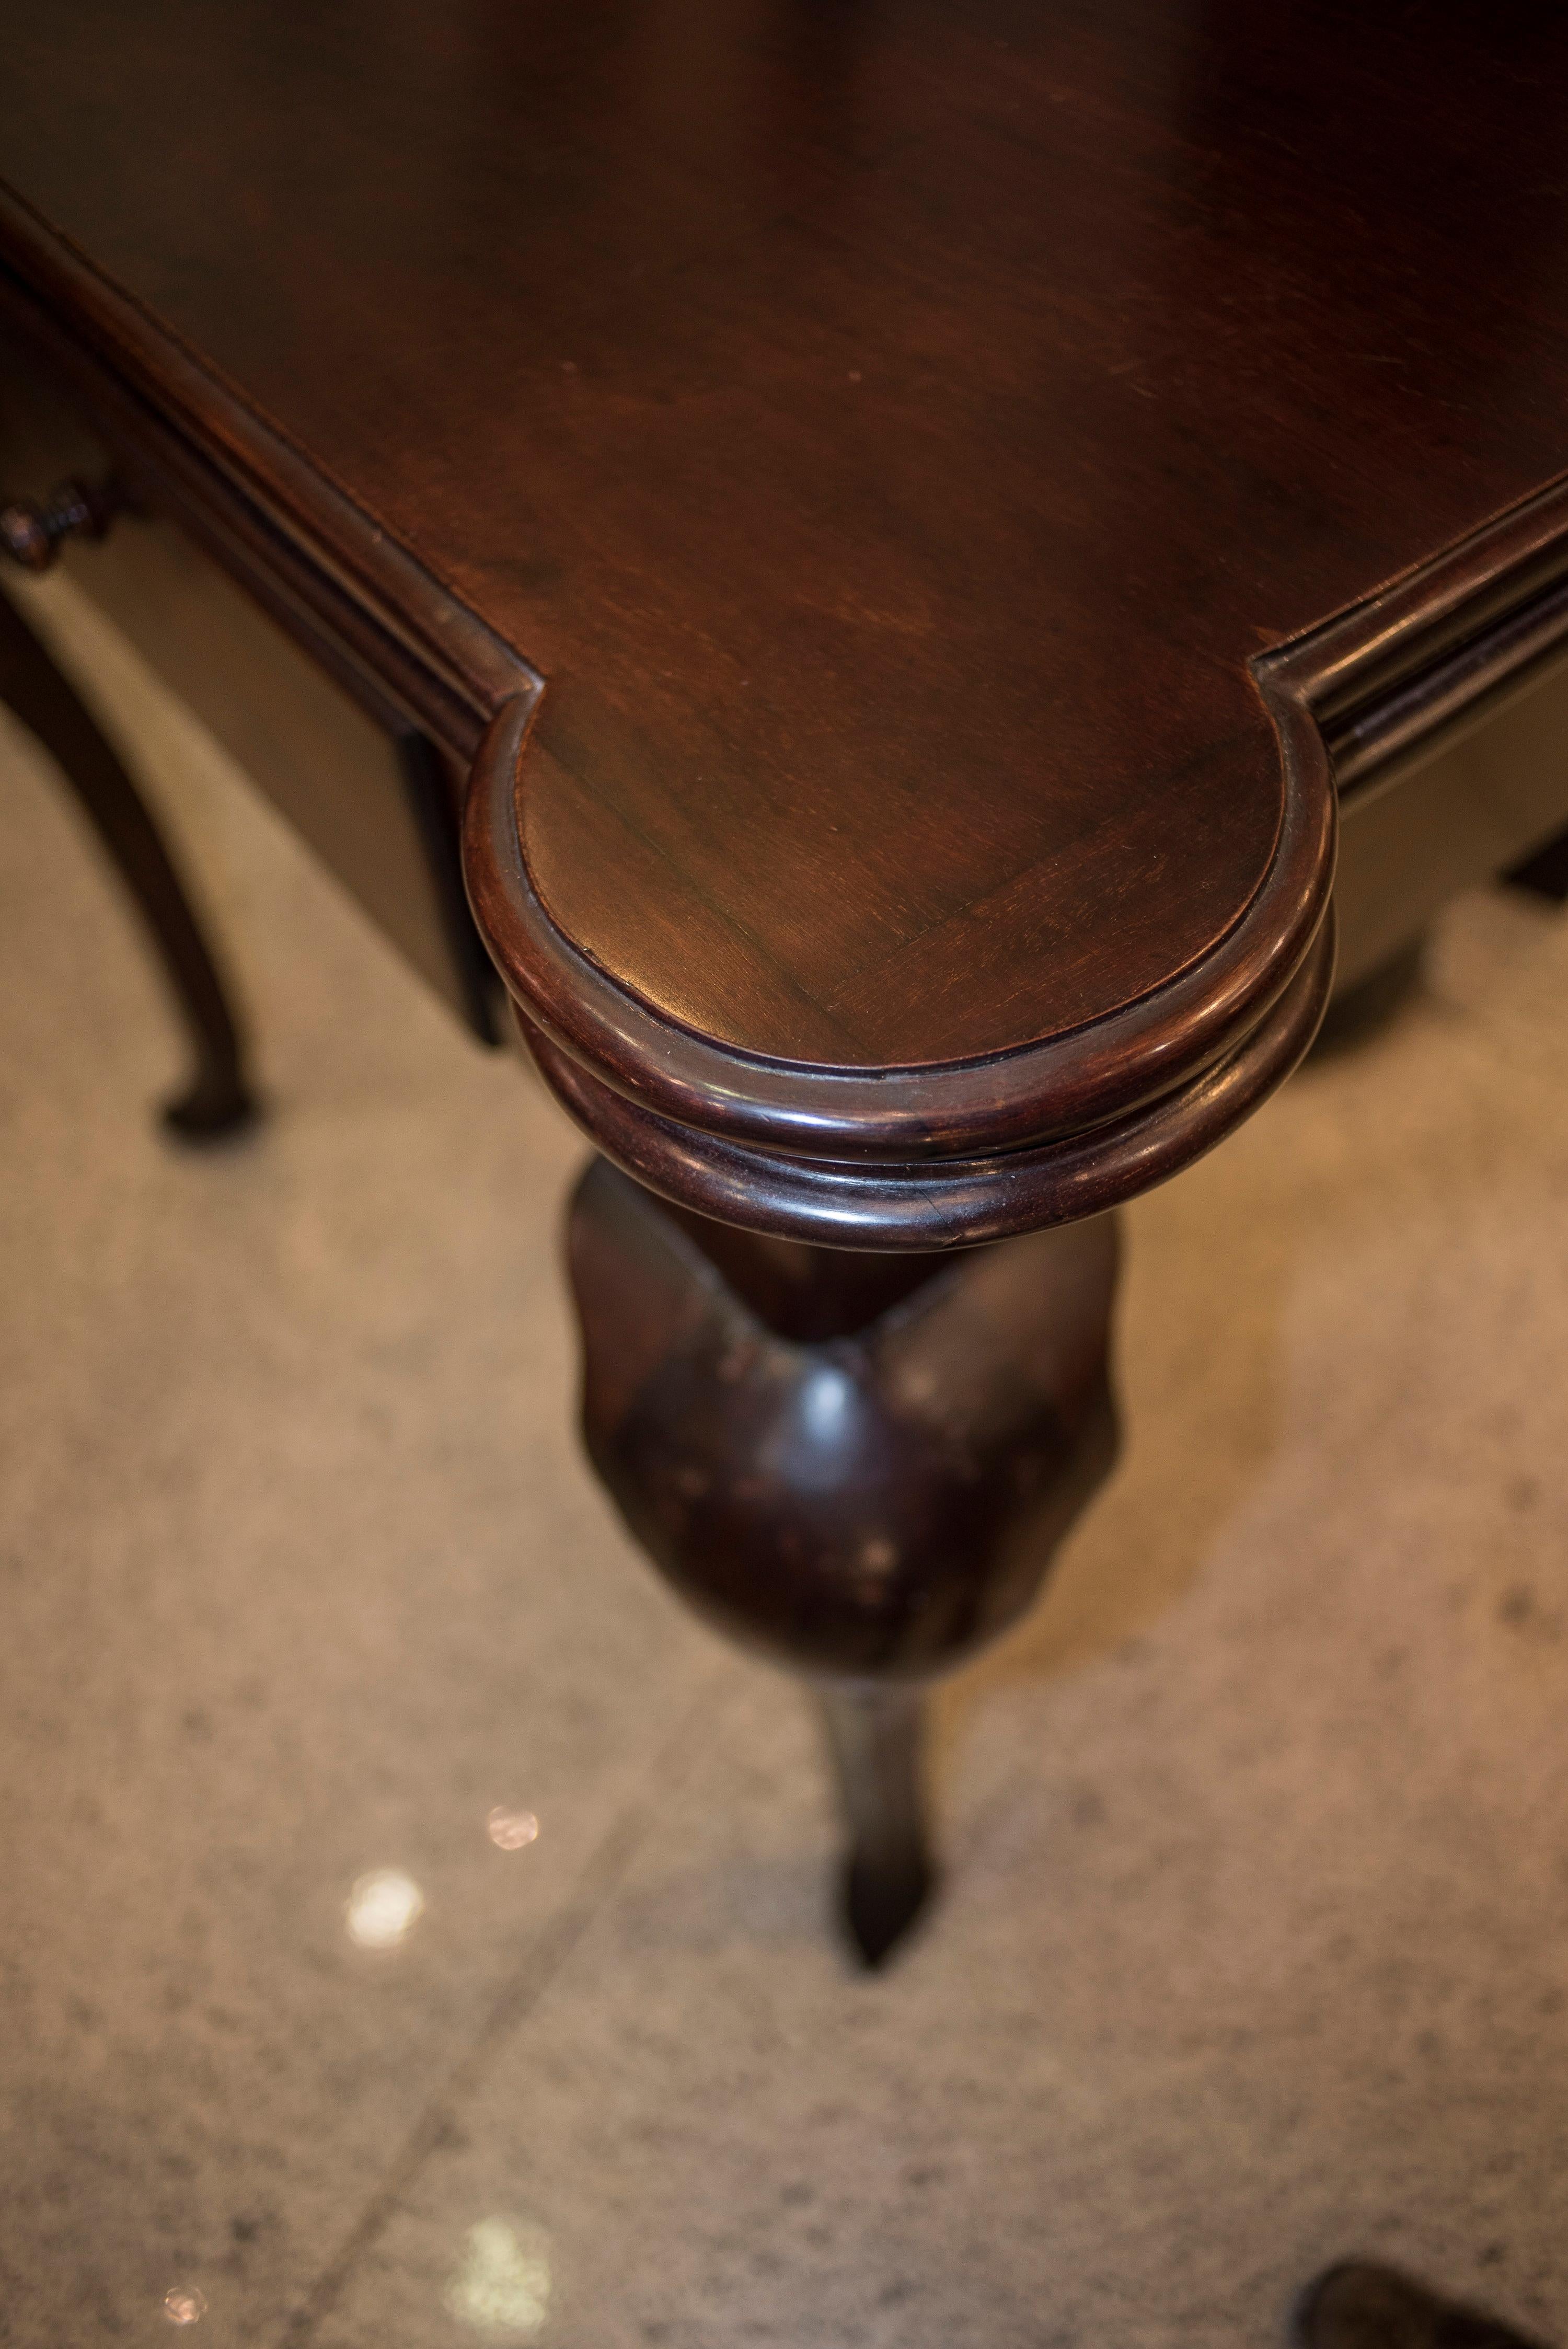 Felt Late 19th Century Chippendale Style Mahogany Wood and Fabric English Table 1880s